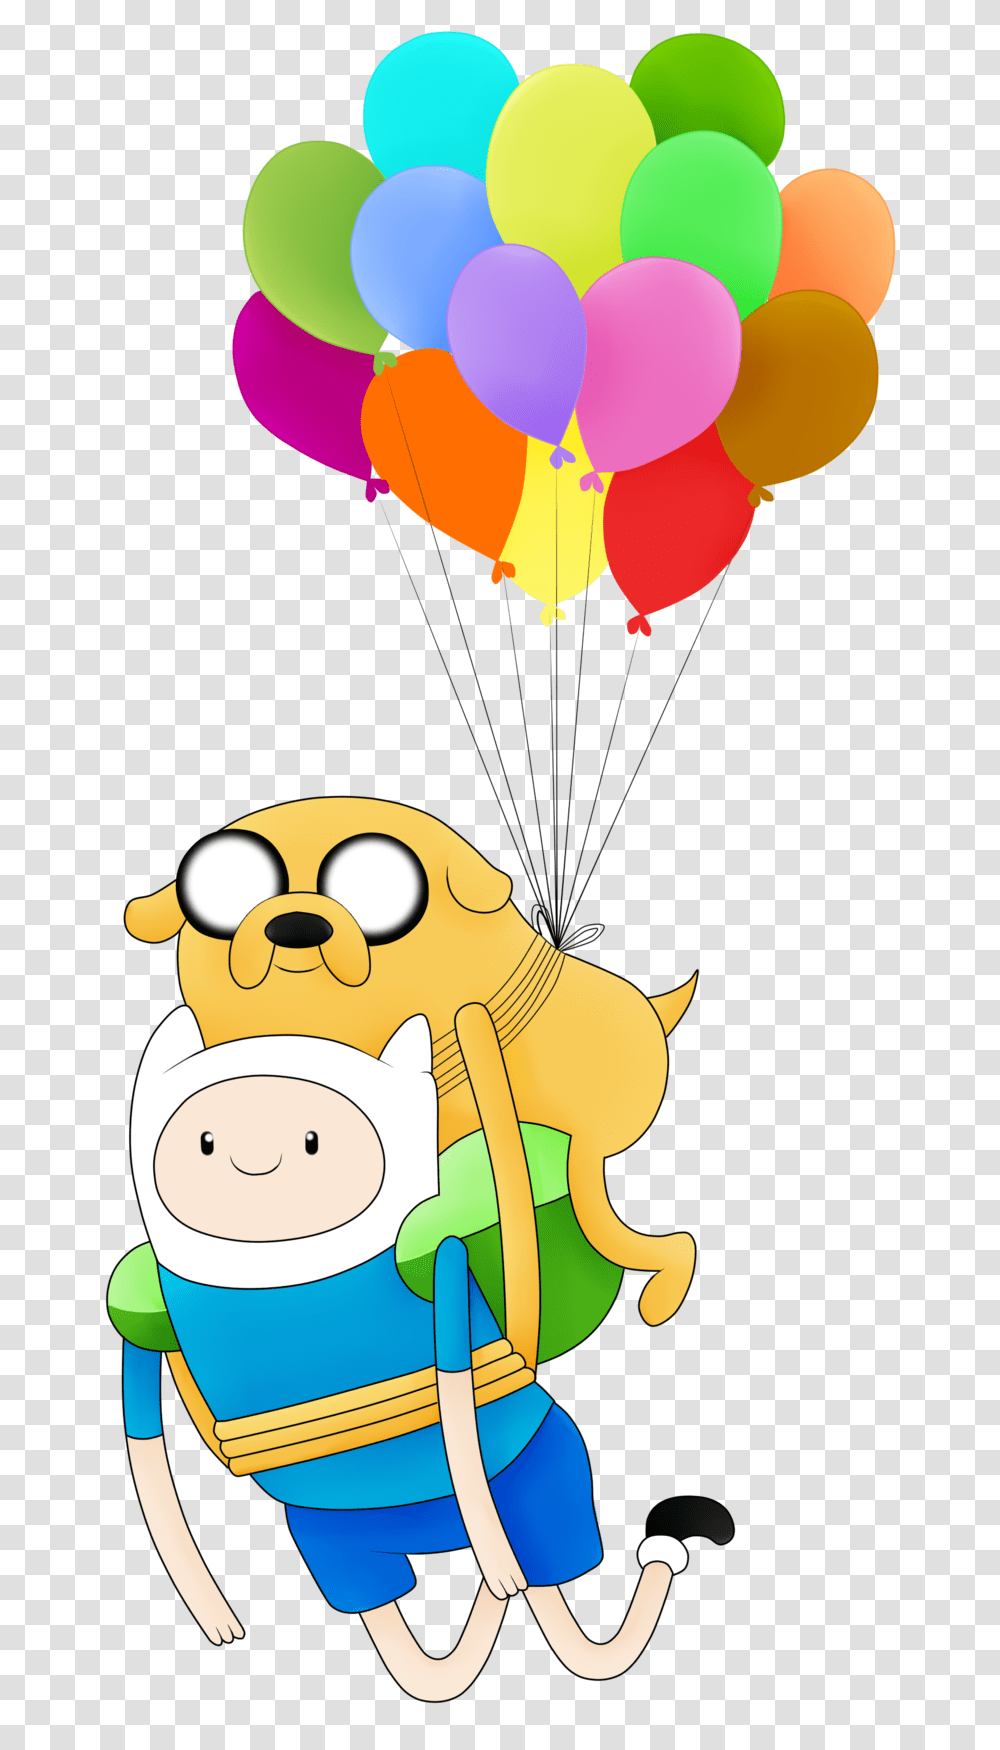 Free Adventure Time Konfest Finn And Jake Birthday, Insect, Invertebrate, Animal, Balloon Transparent Png